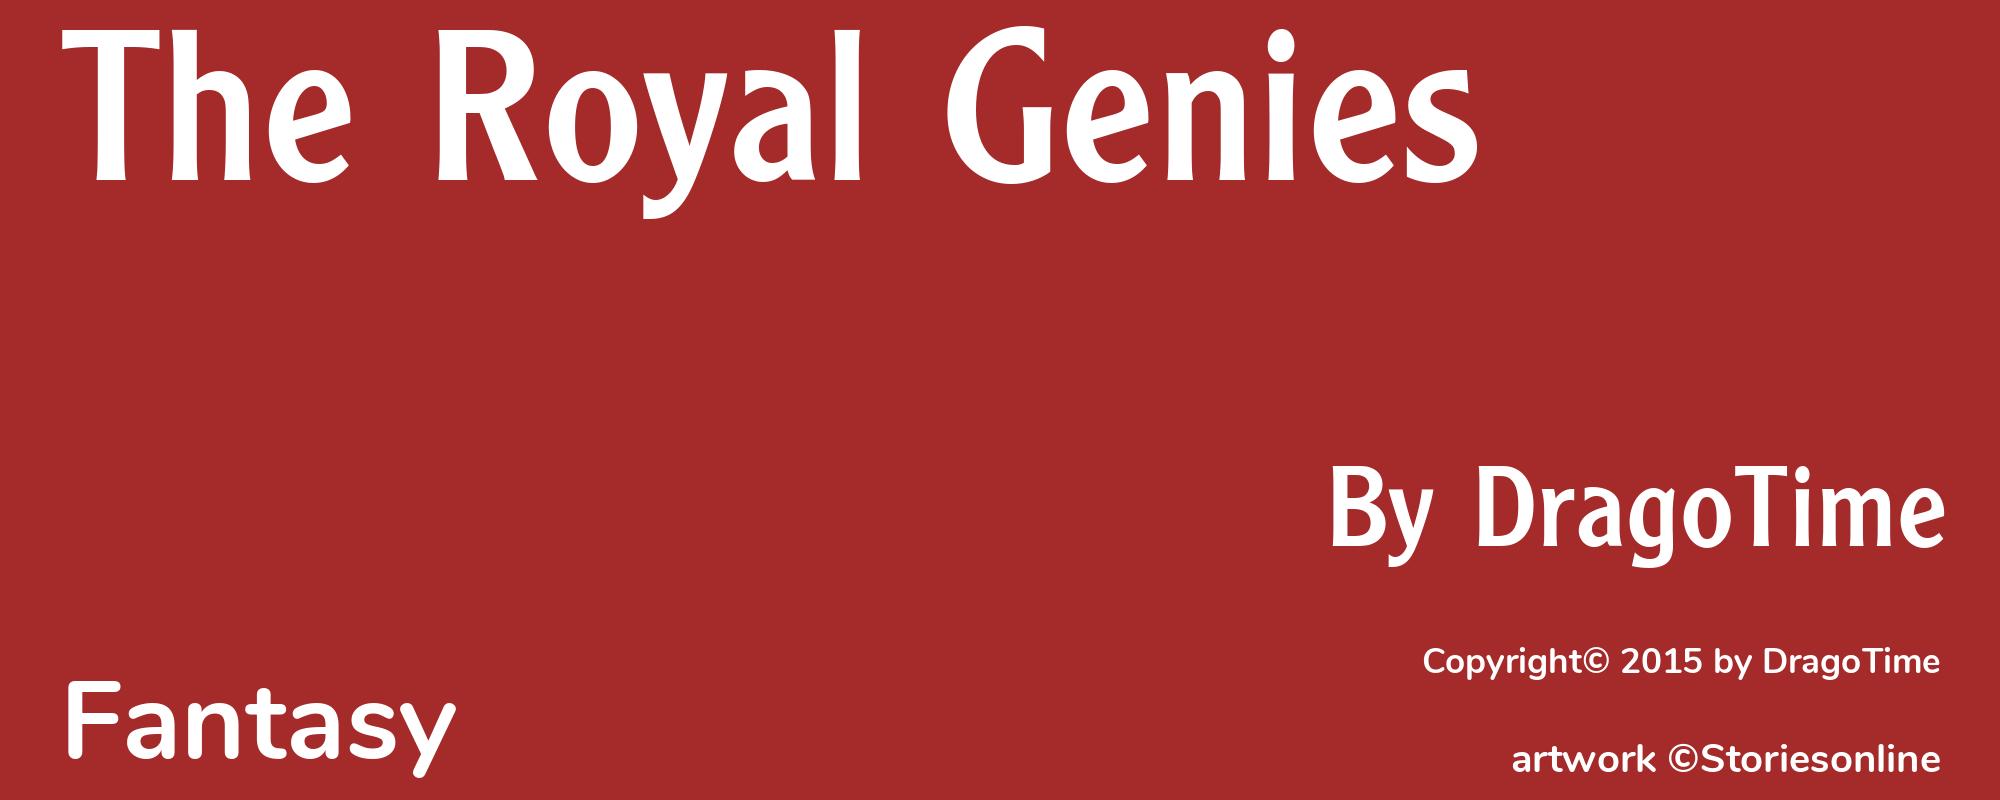 The Royal Genies - Cover